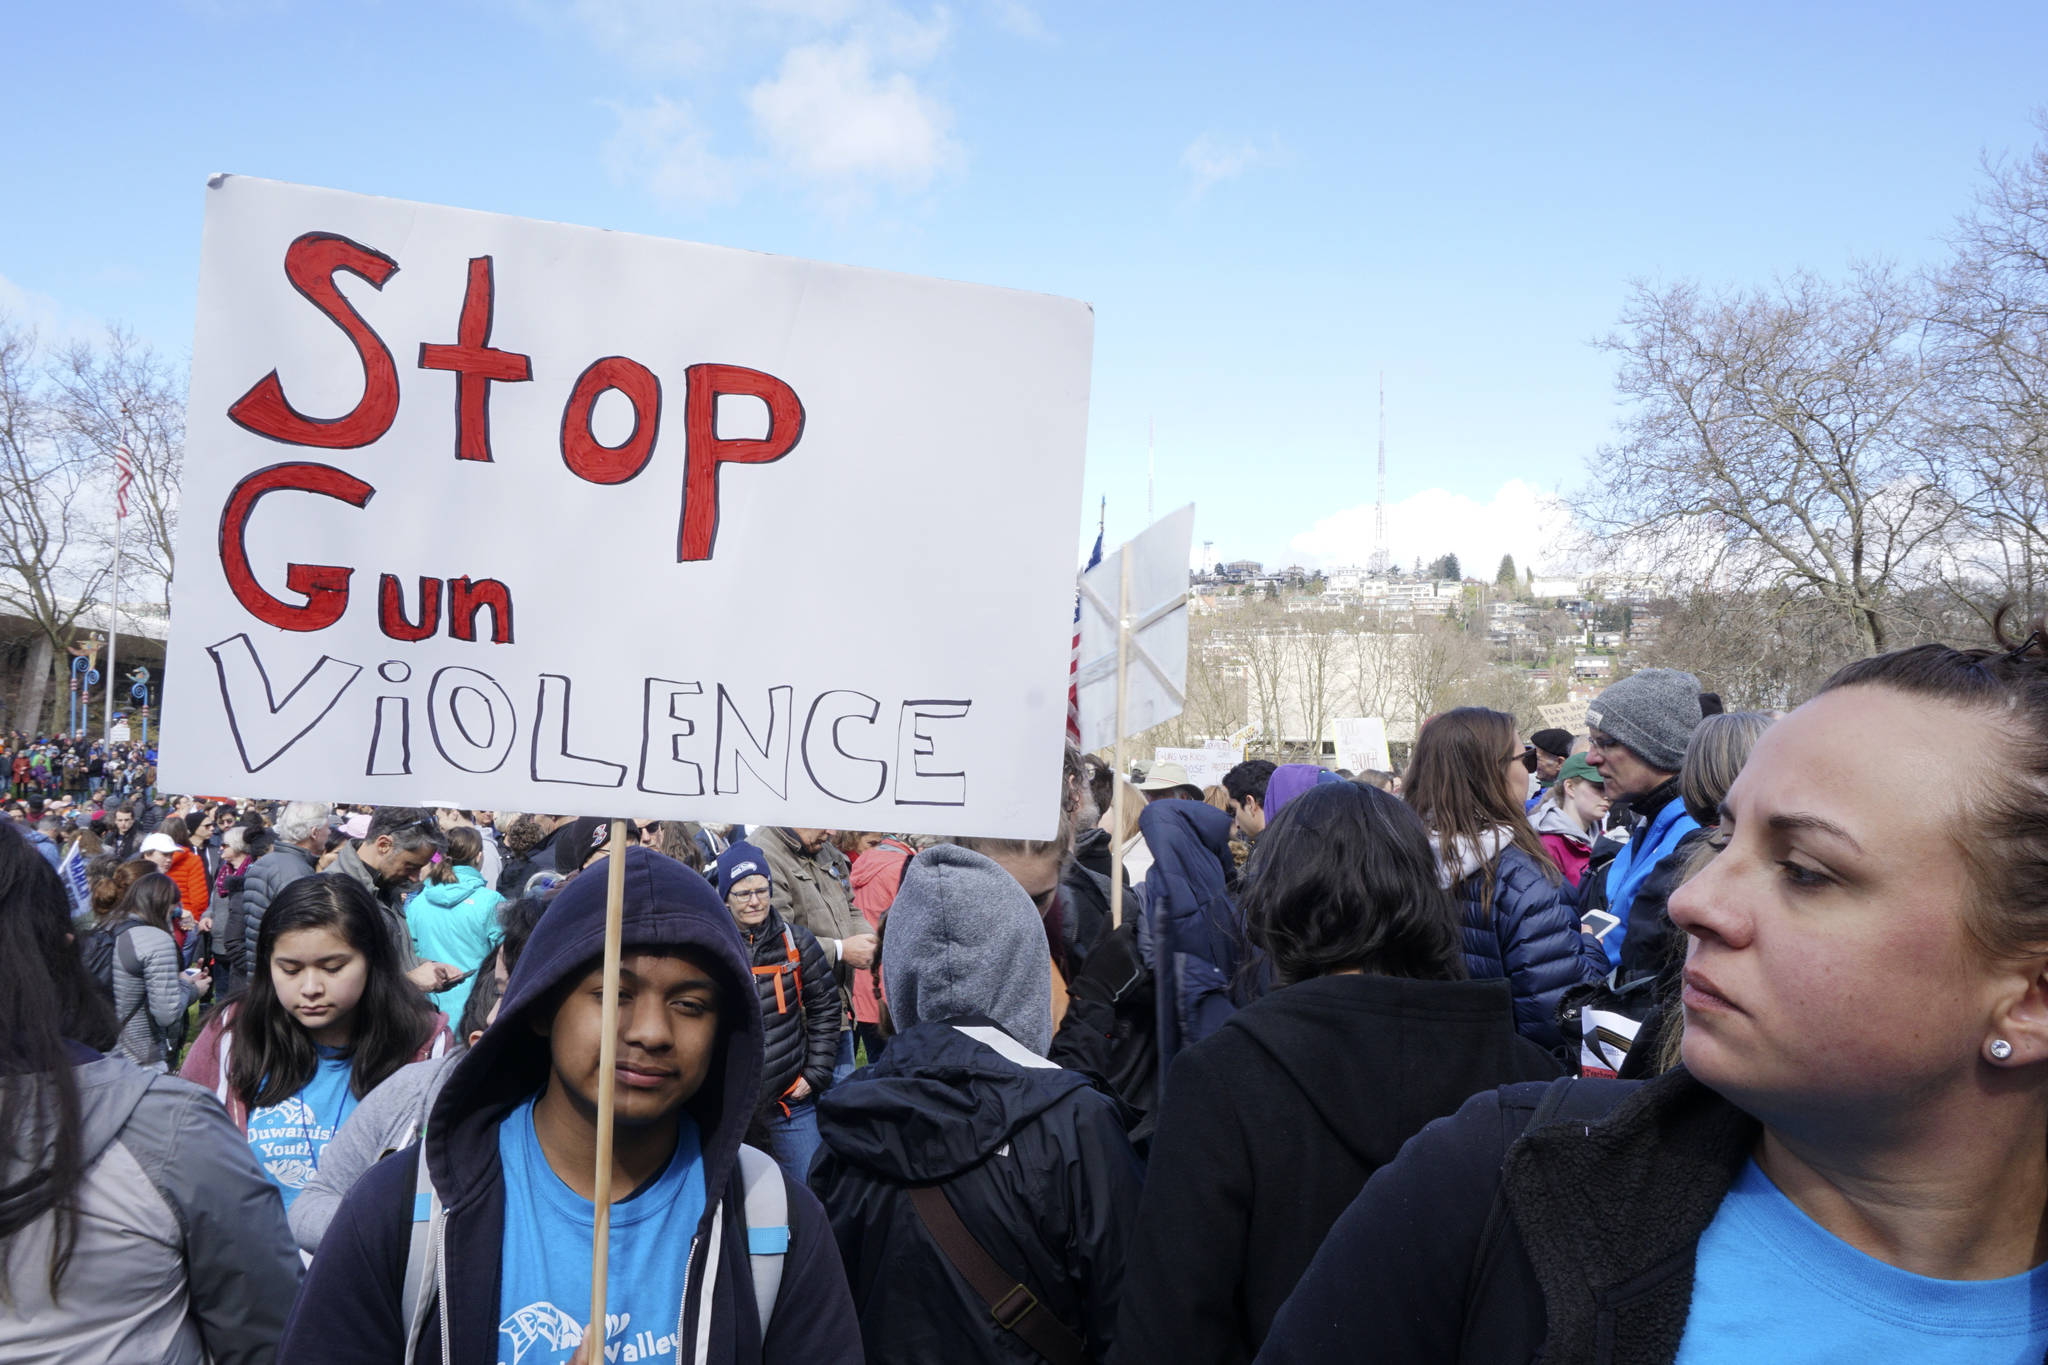 Students gathered at Seattle Center at the end of the March for Our Lives demonstration on March 24, 2018. Photo by Melissa Hellmann